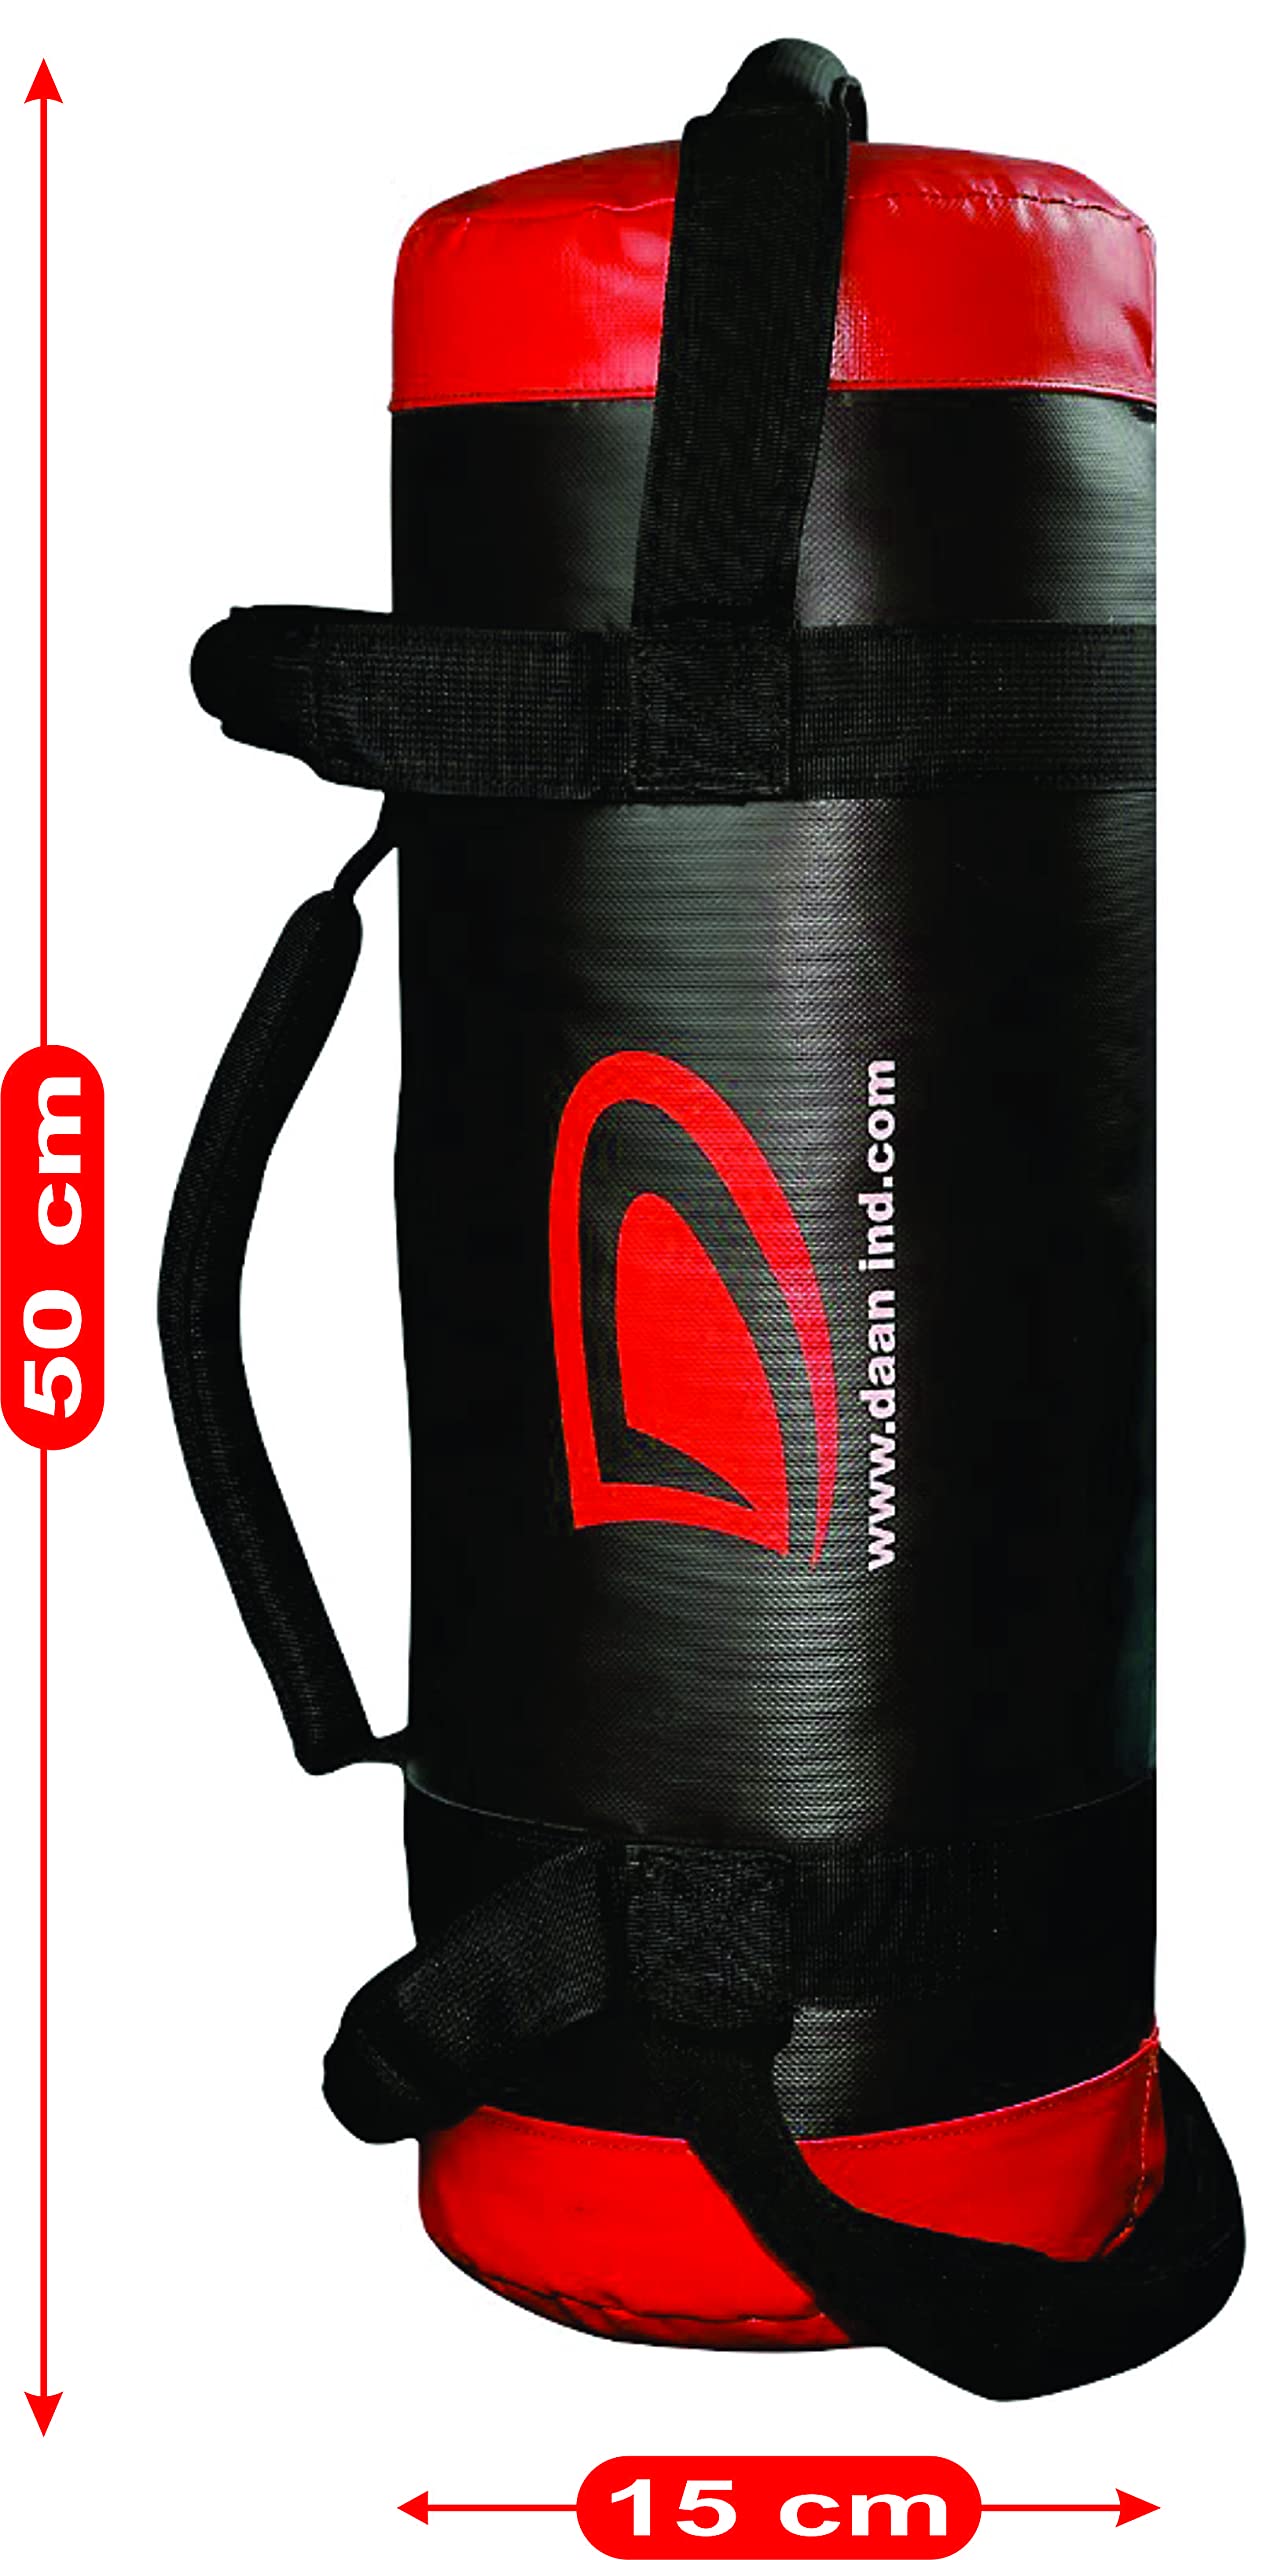 Buy Kobo CTA-09 5 kg Sandbag Adjustable Weight Power Training Filled  Fitness Bag Cross Fitness Exercise Running Workout Sand Bag (IMPORTED)  Online at Low Prices in India - Paytmmall.com